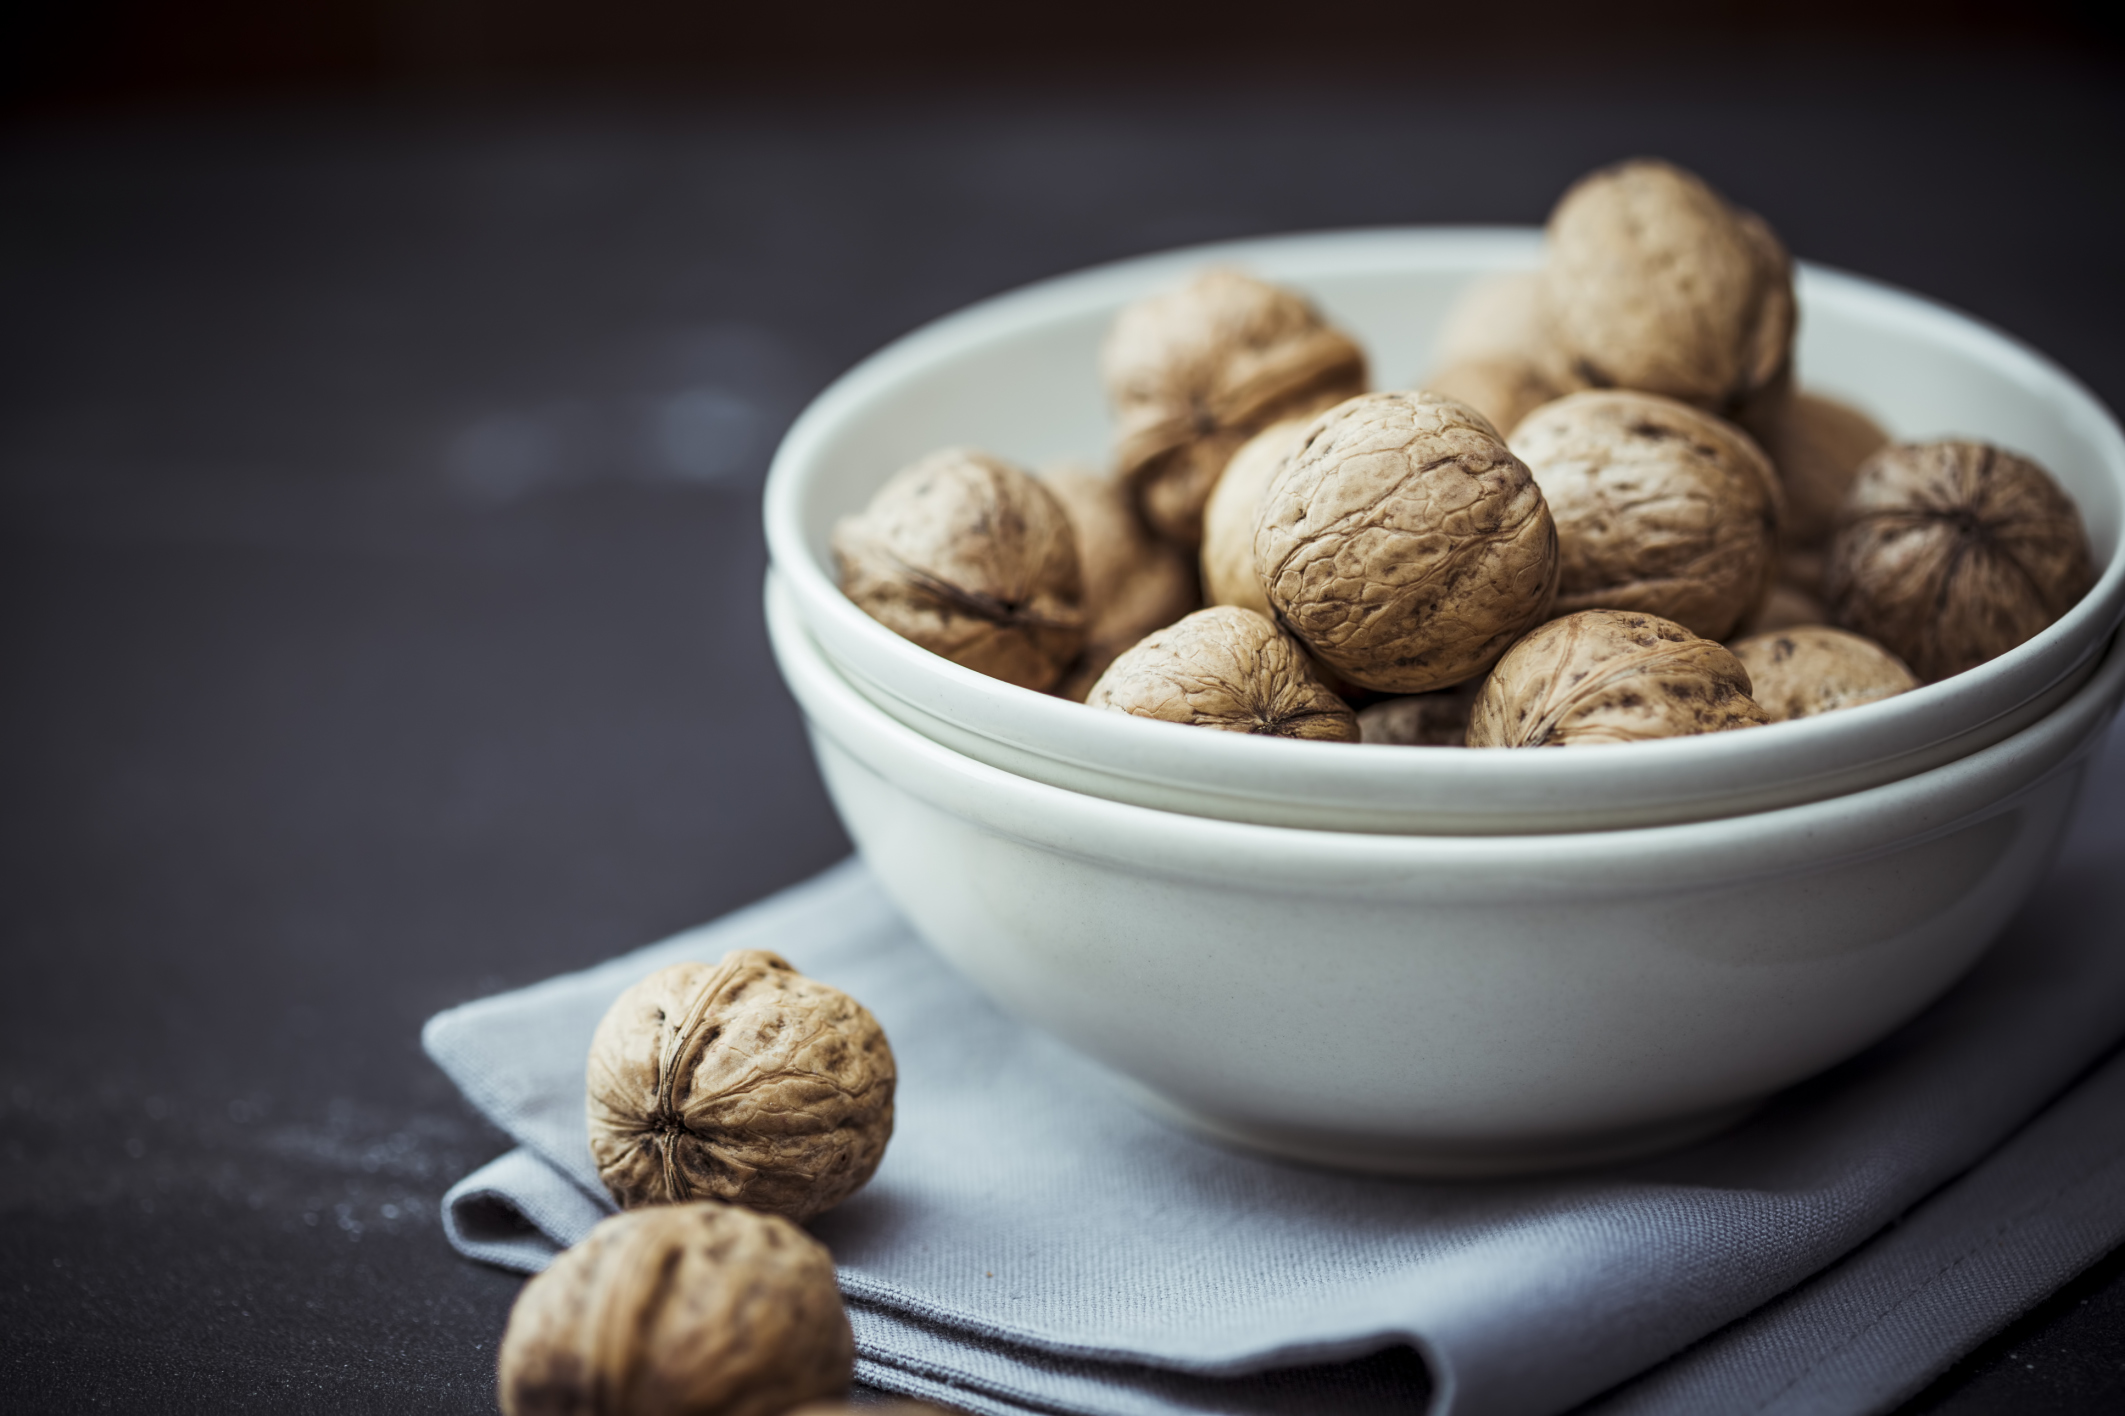 What effect do nuts have on gastrointestinal health?